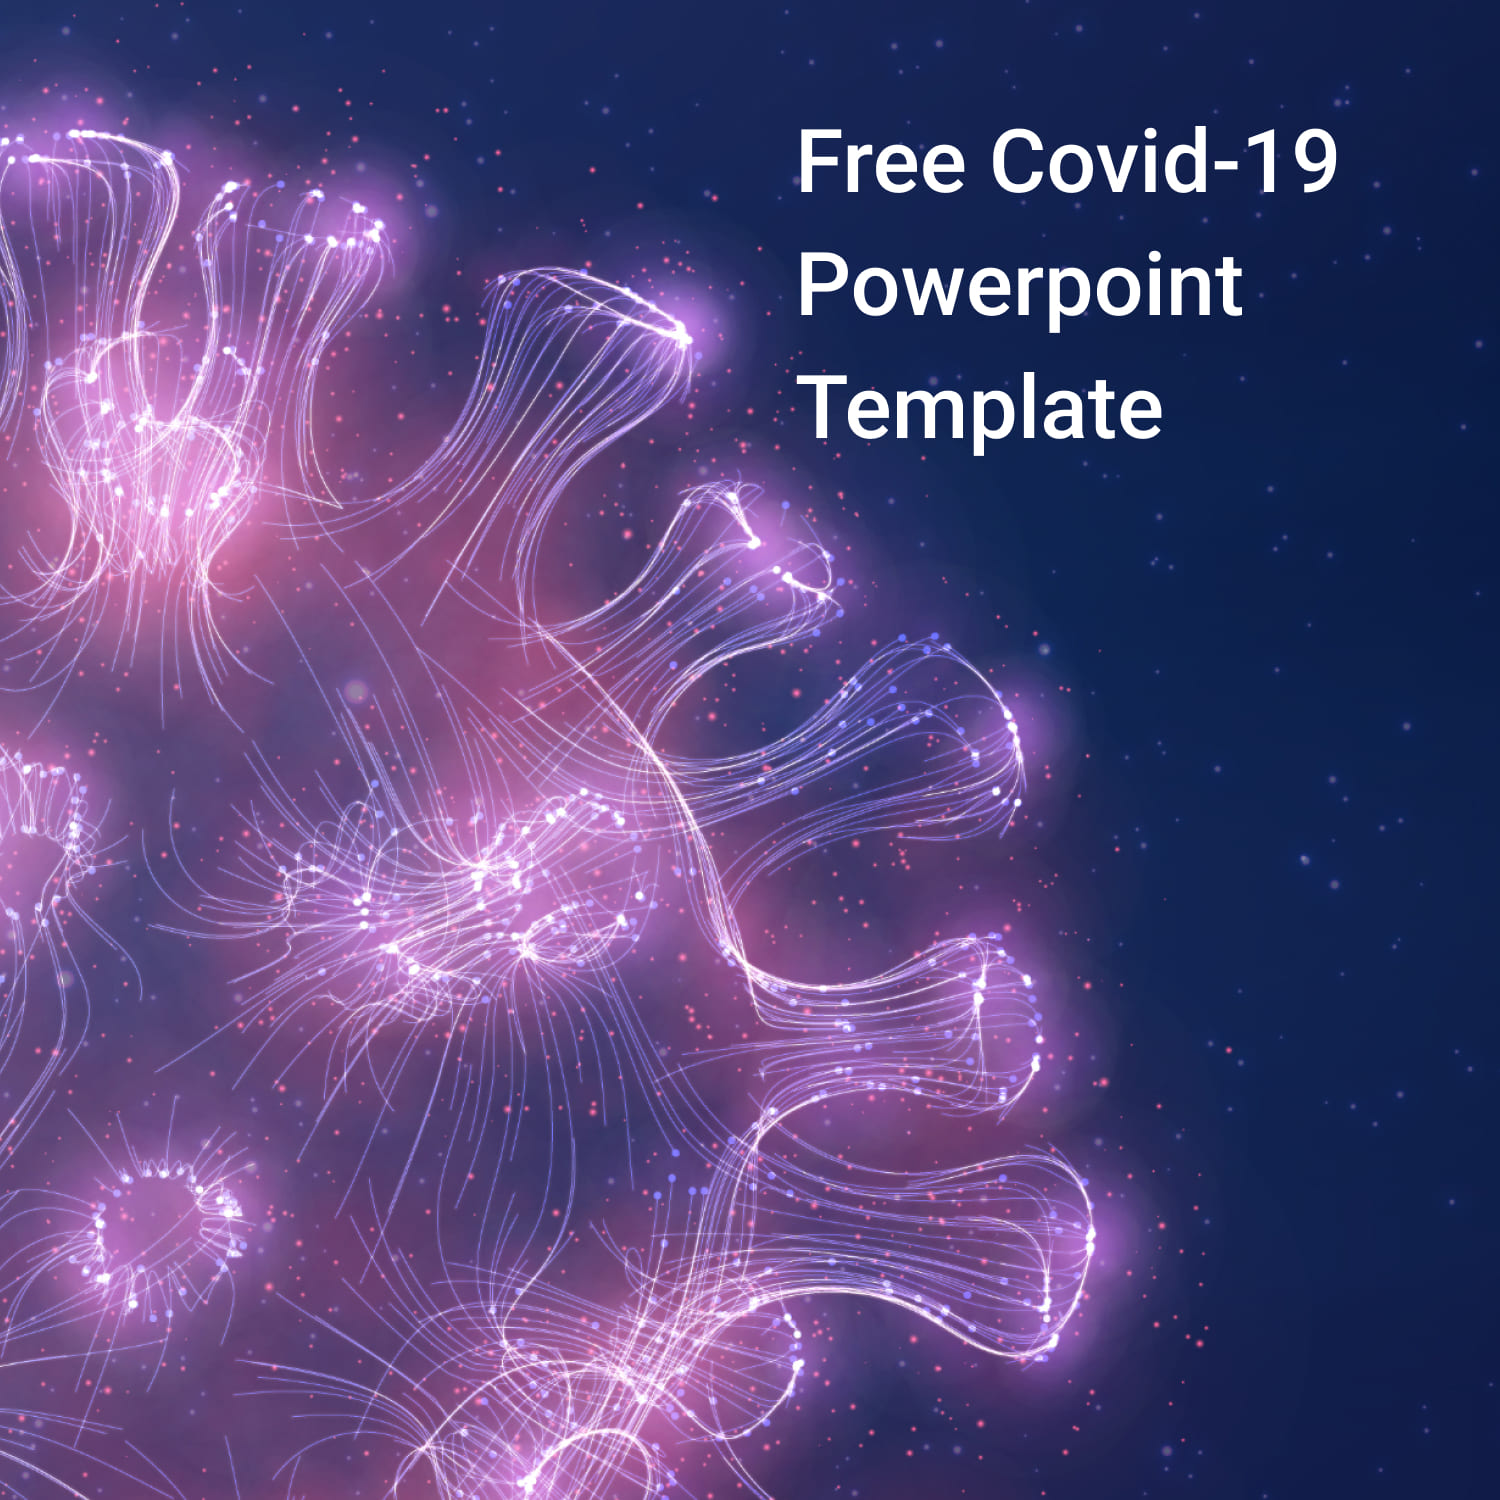 1500x1500 1 Free Covid 19 Powerpoint Template.